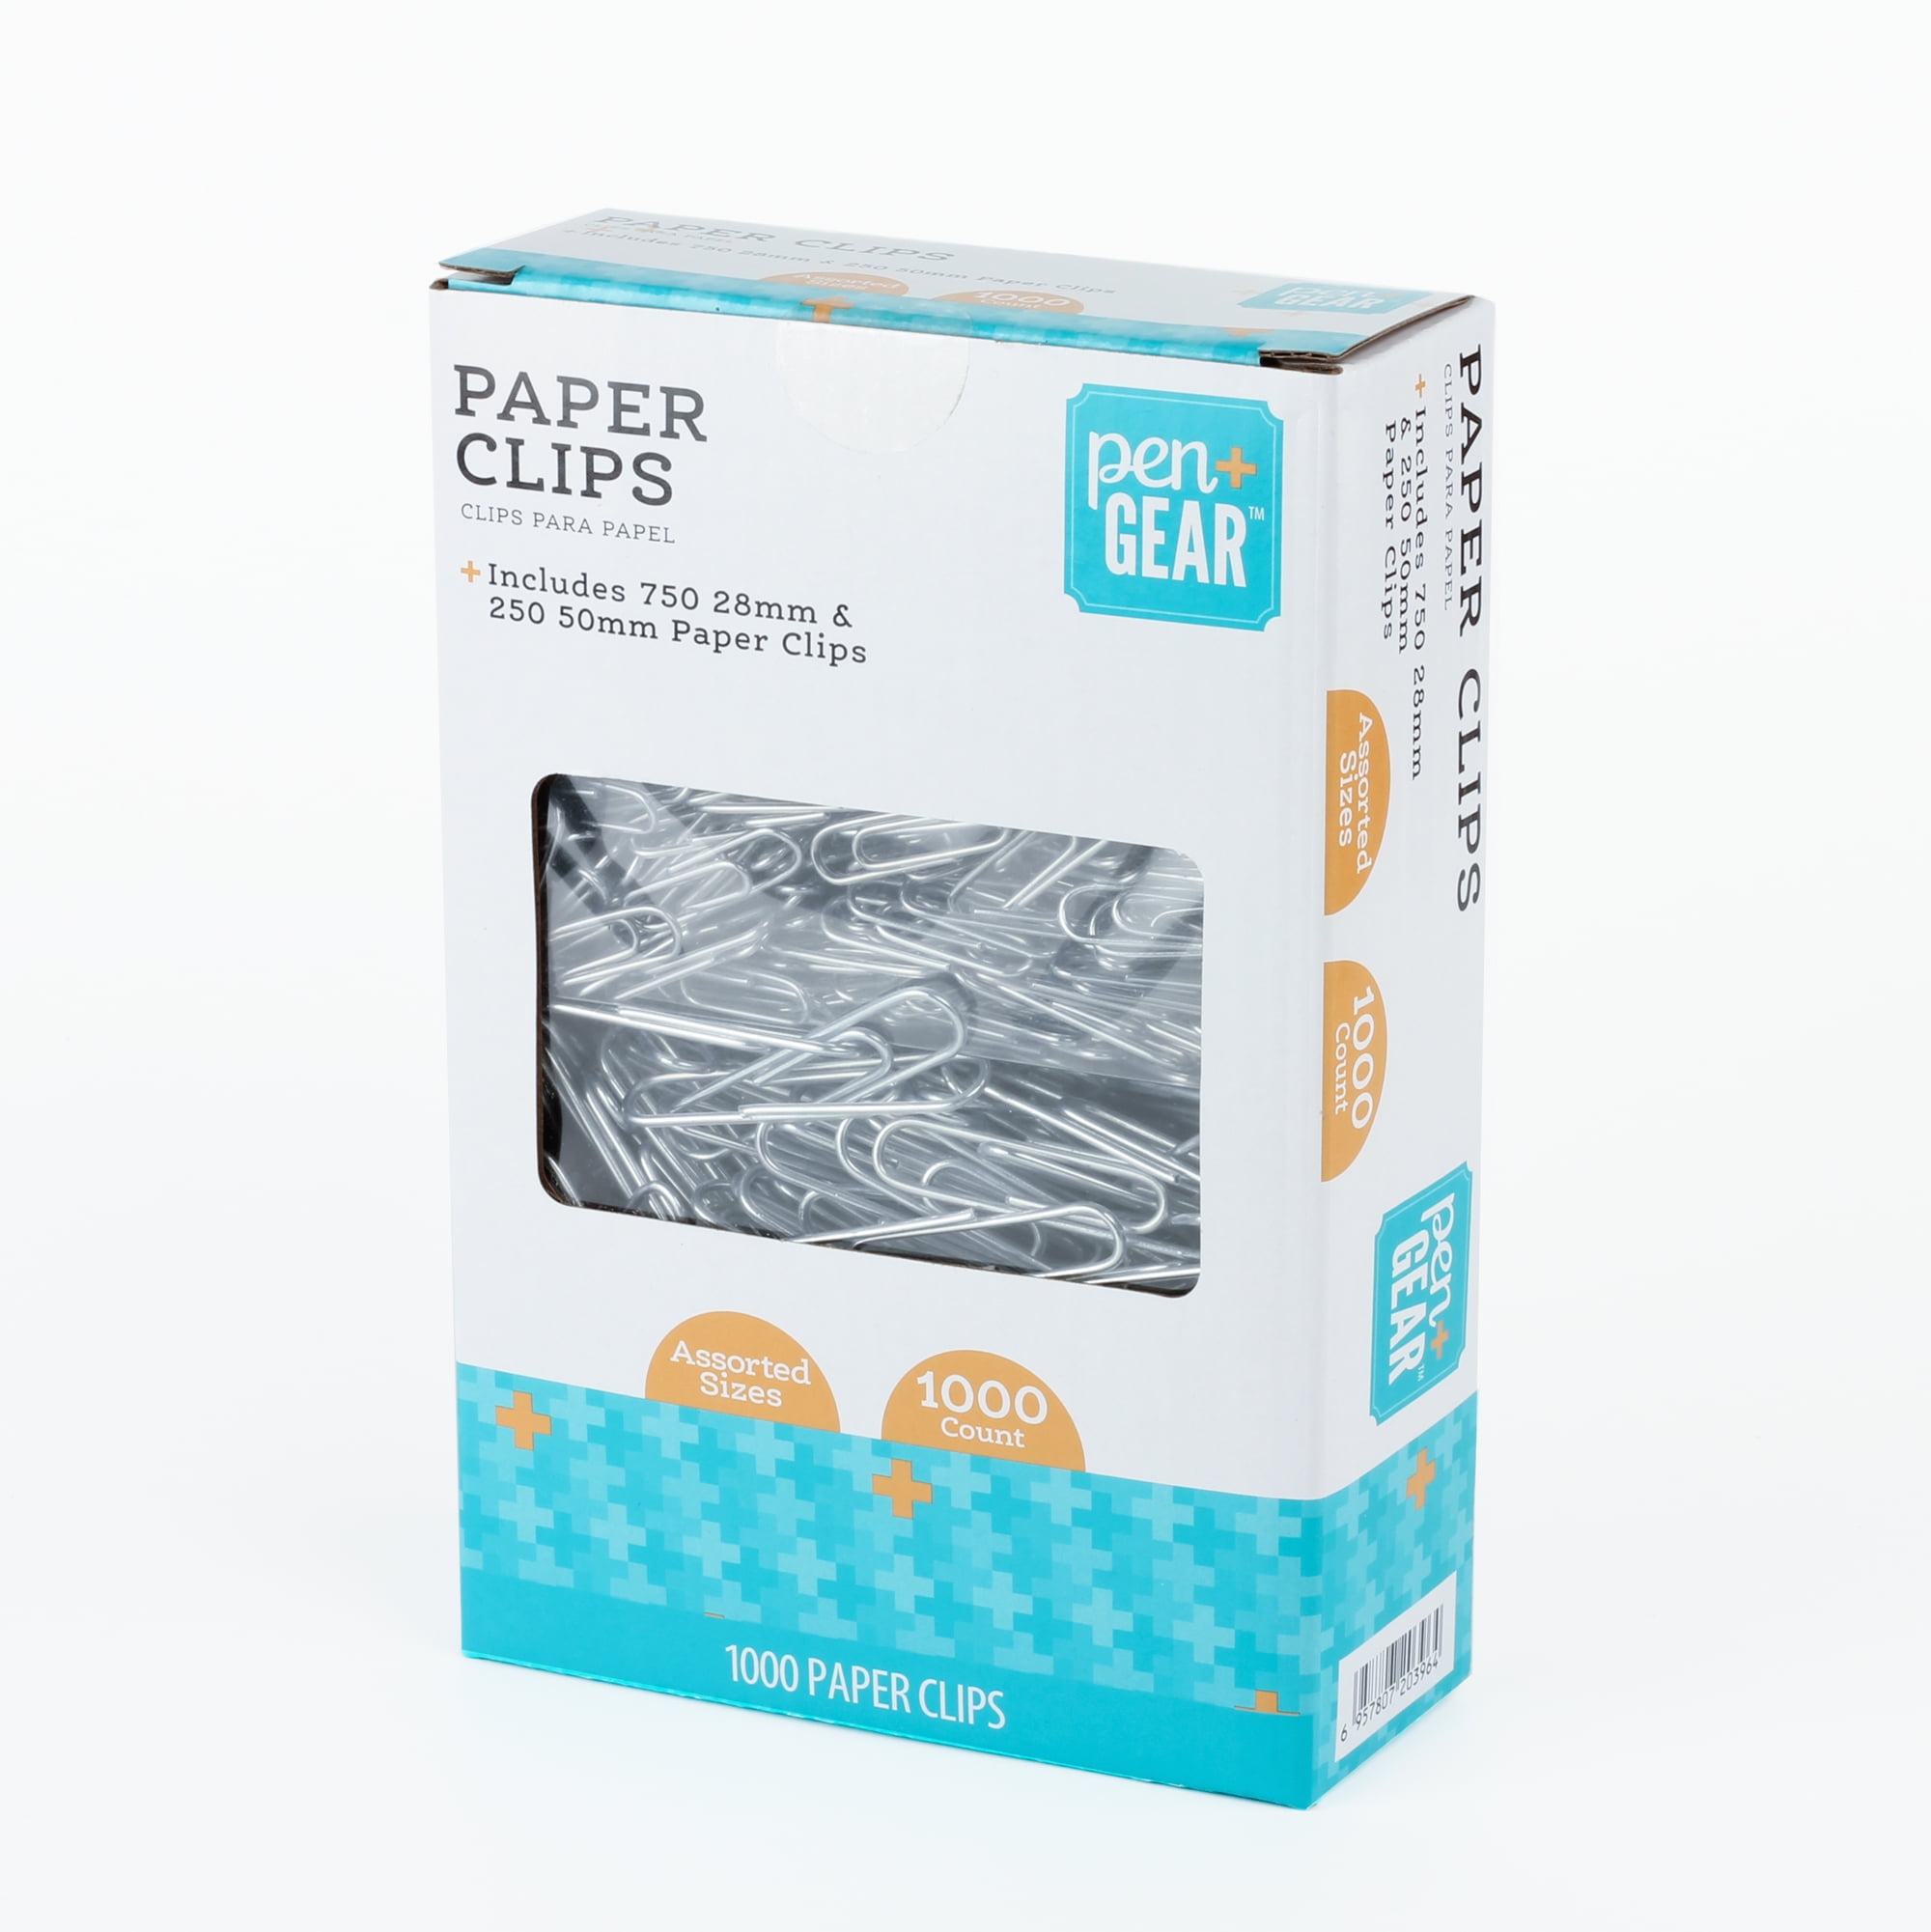 Pen + Gear Paper Clips, Assorted Sized, 28mm & 50mm, Silver 1,000